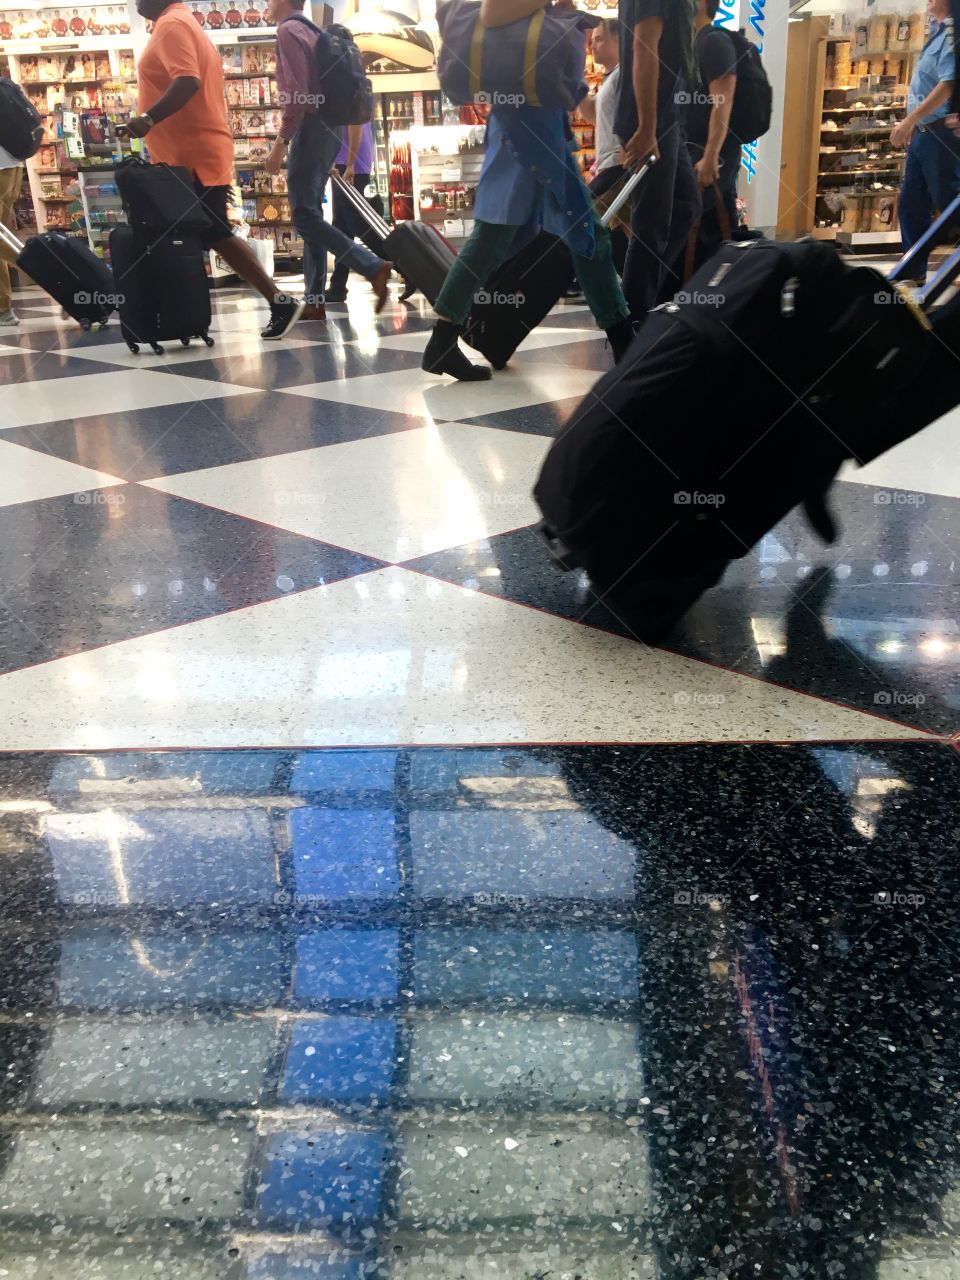 Sitting in the airport terminal just observing.